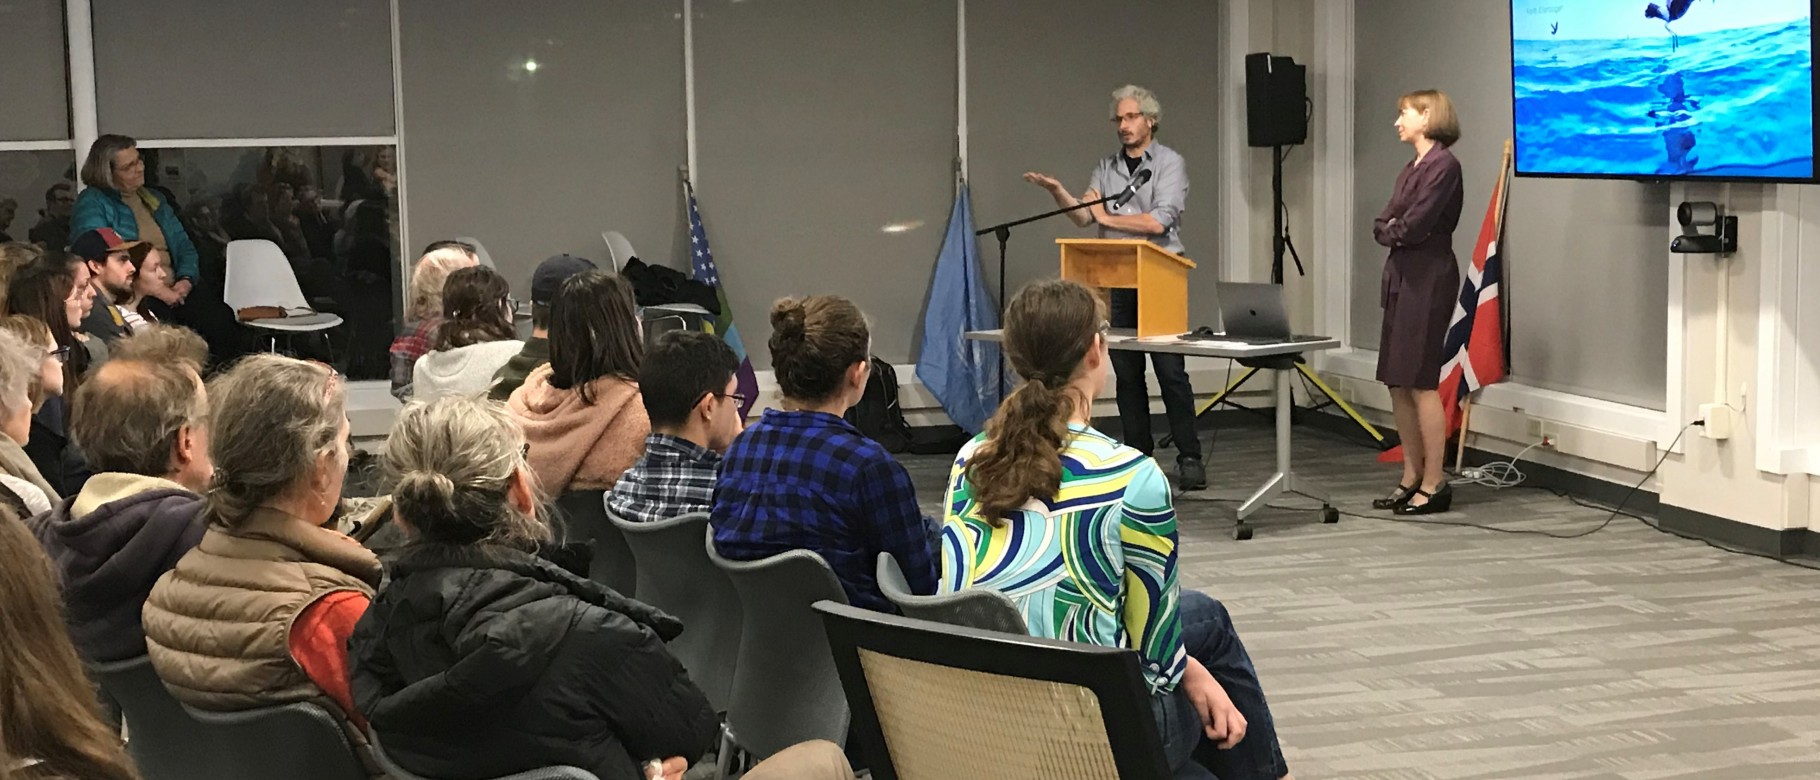 The University of New England Planetary Health Council and UNE NORTH hosted "Sea Change" in November.